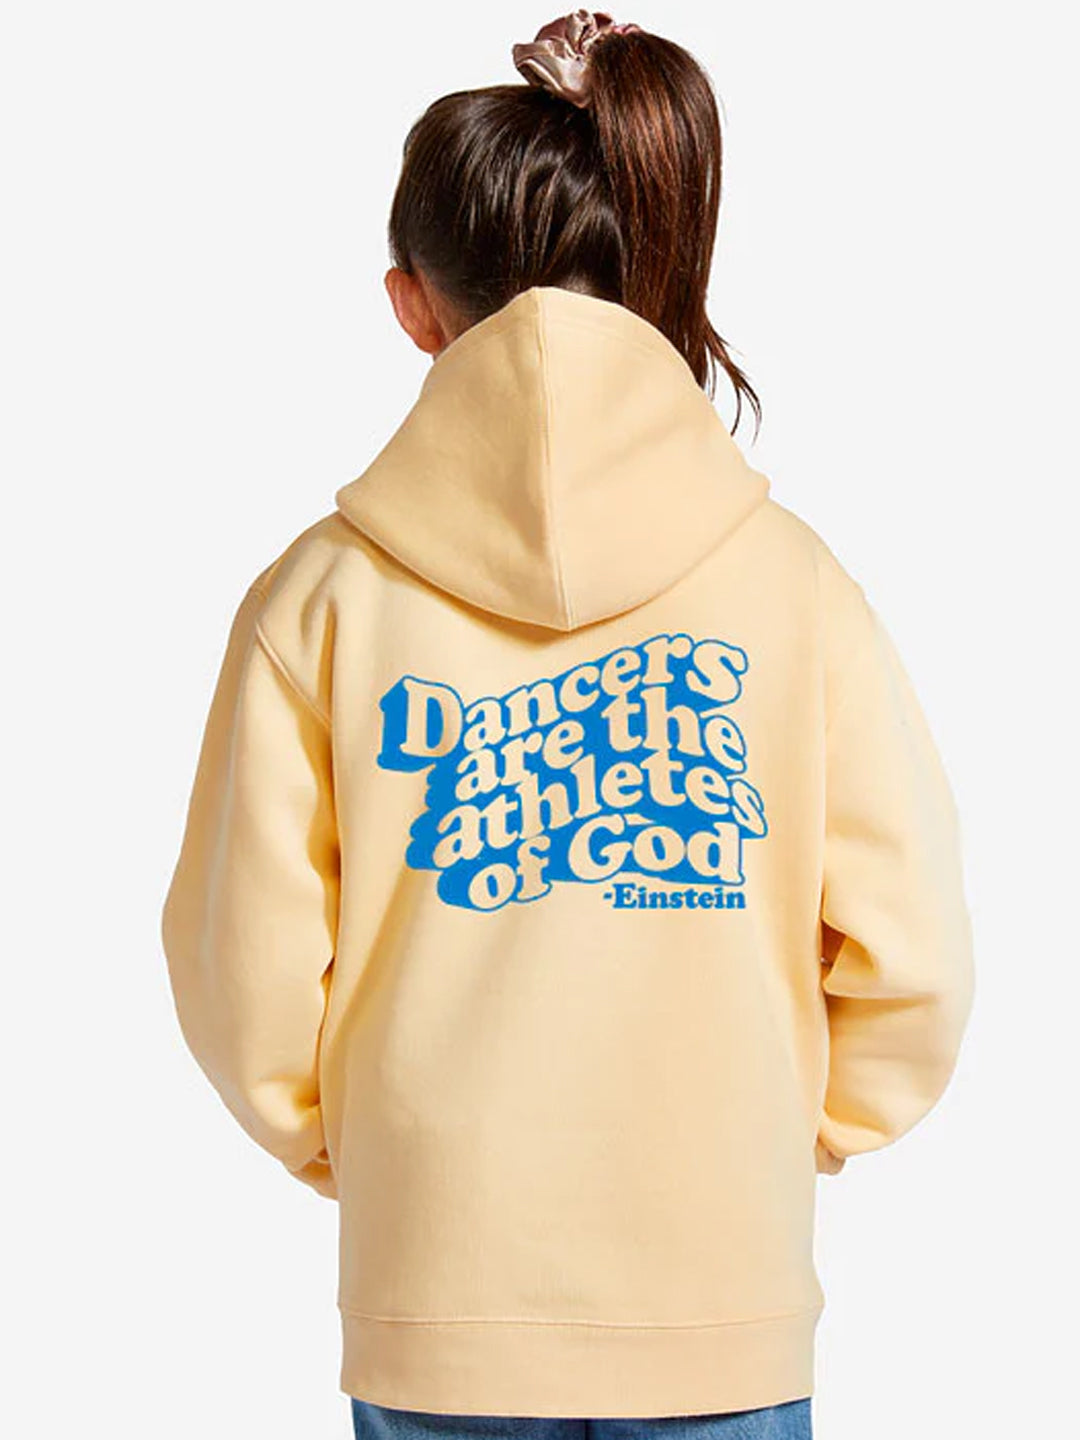 Dancers Are The Athletes of God Hoodie